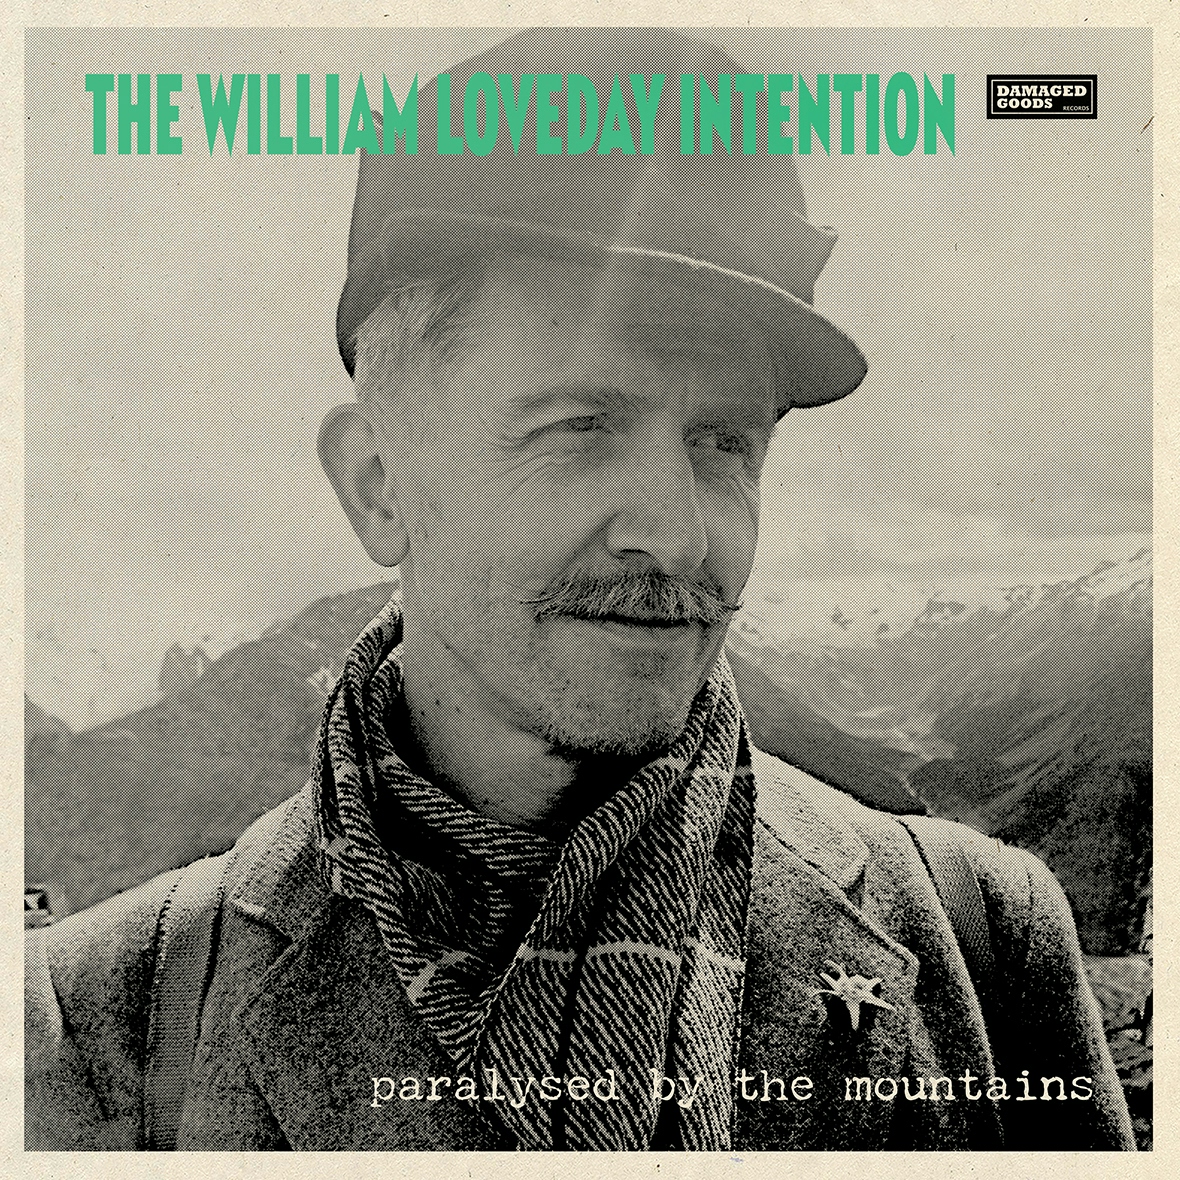 Album artwork for Paralysed by the Mountains by The William Loveday Intention